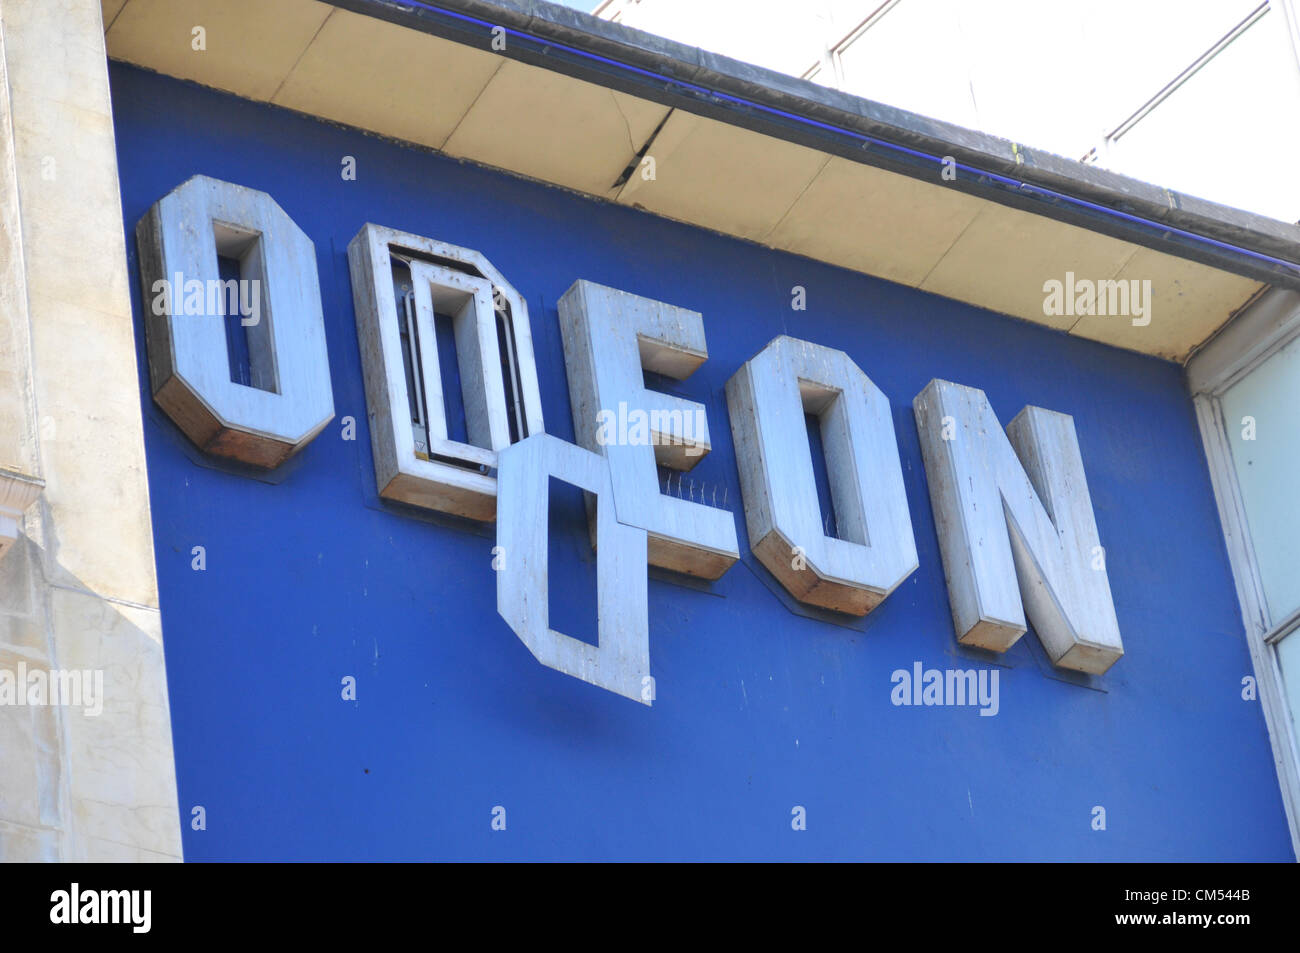 Charing Cross Road, London, UK. 6th October 2012. The metal coverings of the ODEON cinema on Charing Cross Road are removed by firemen after one of the signs nearly fell to the ground. Stock Photo